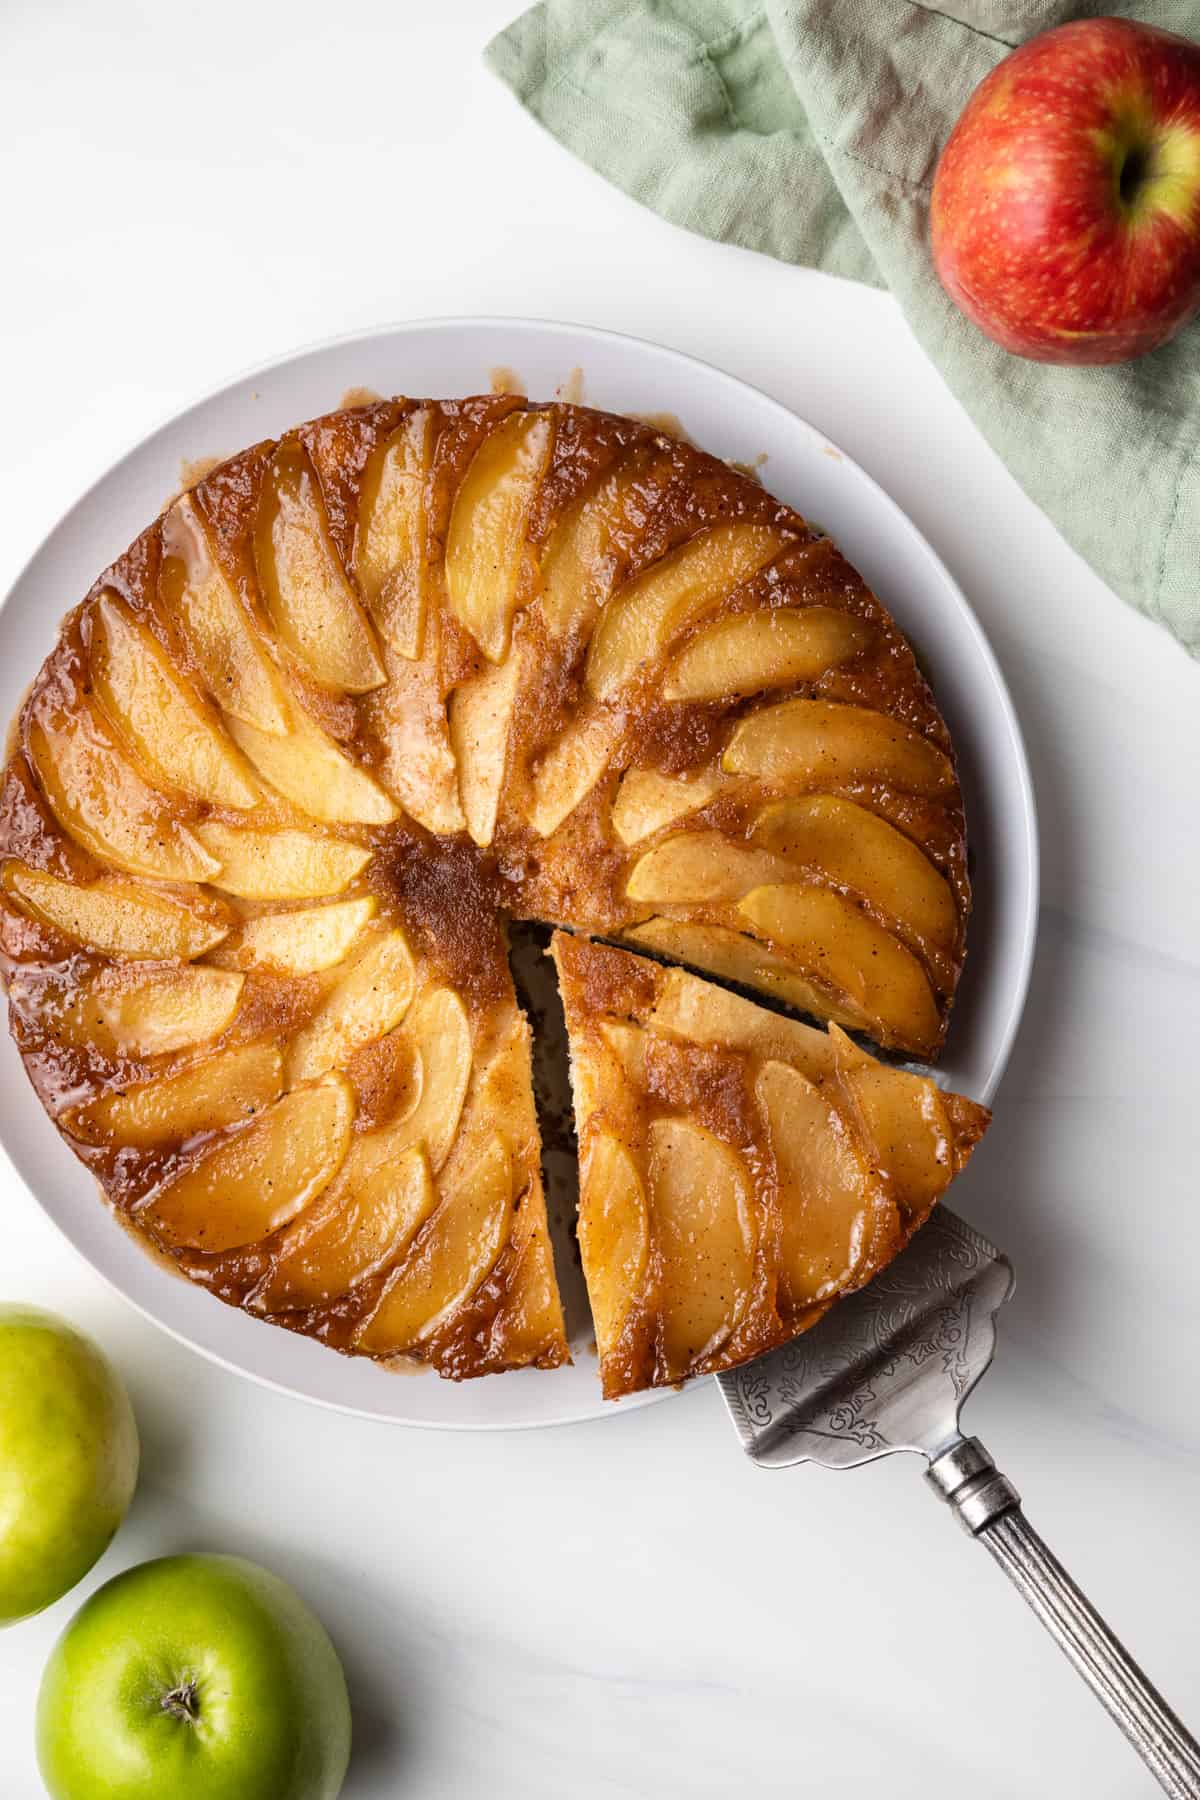 Apple upside down cake with a slice being taken out.